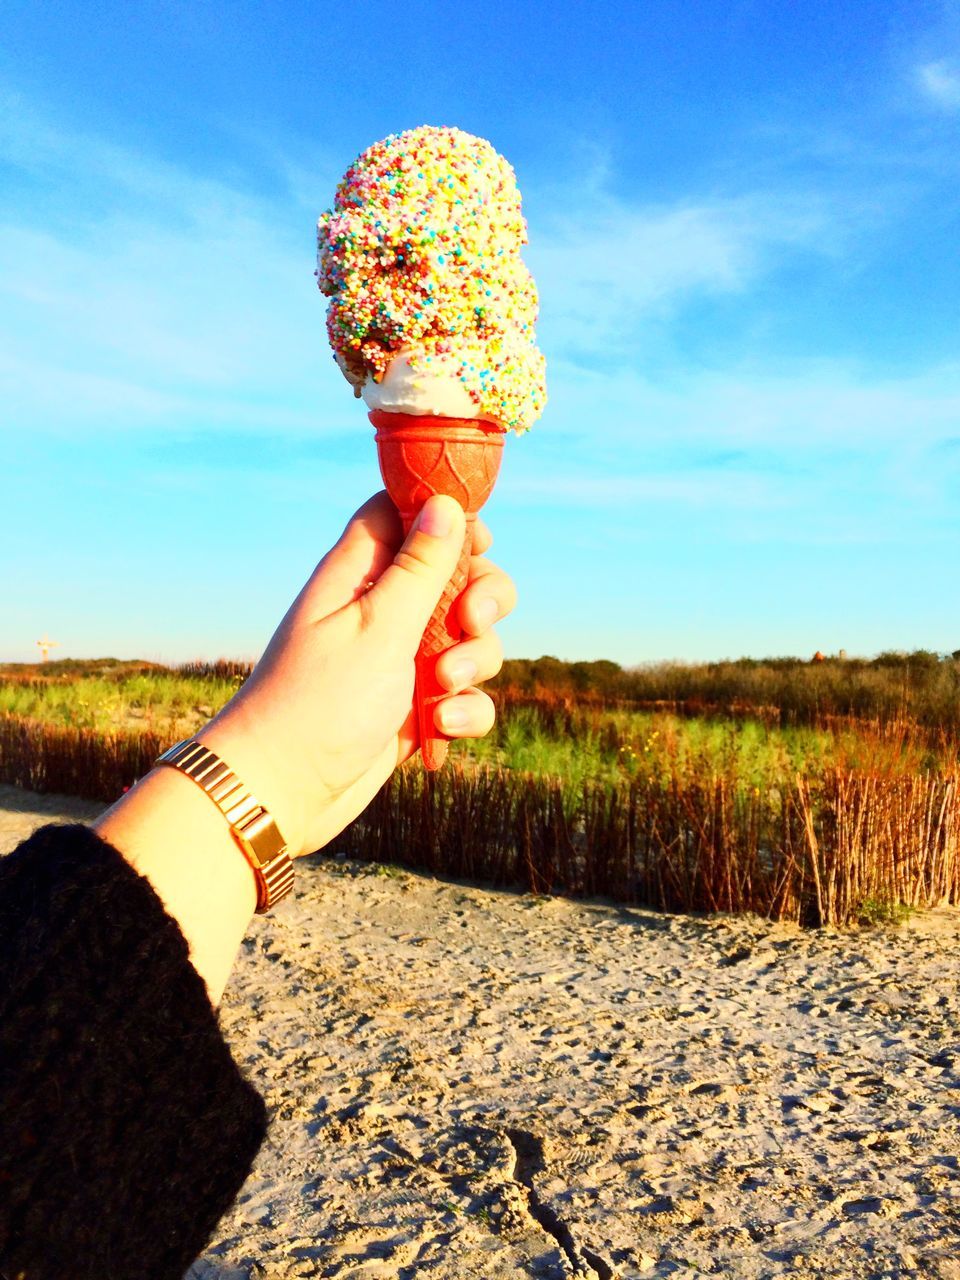 human hand, human body part, one person, real people, sky, outdoors, holding, personal perspective, day, leisure activity, lifestyles, sweet food, field, grass, sunlight, cloud - sky, ice cream cone, wristwatch, dessert, ice cream, nature, landscape, women, close-up, frozen food, tree, beauty in nature, people